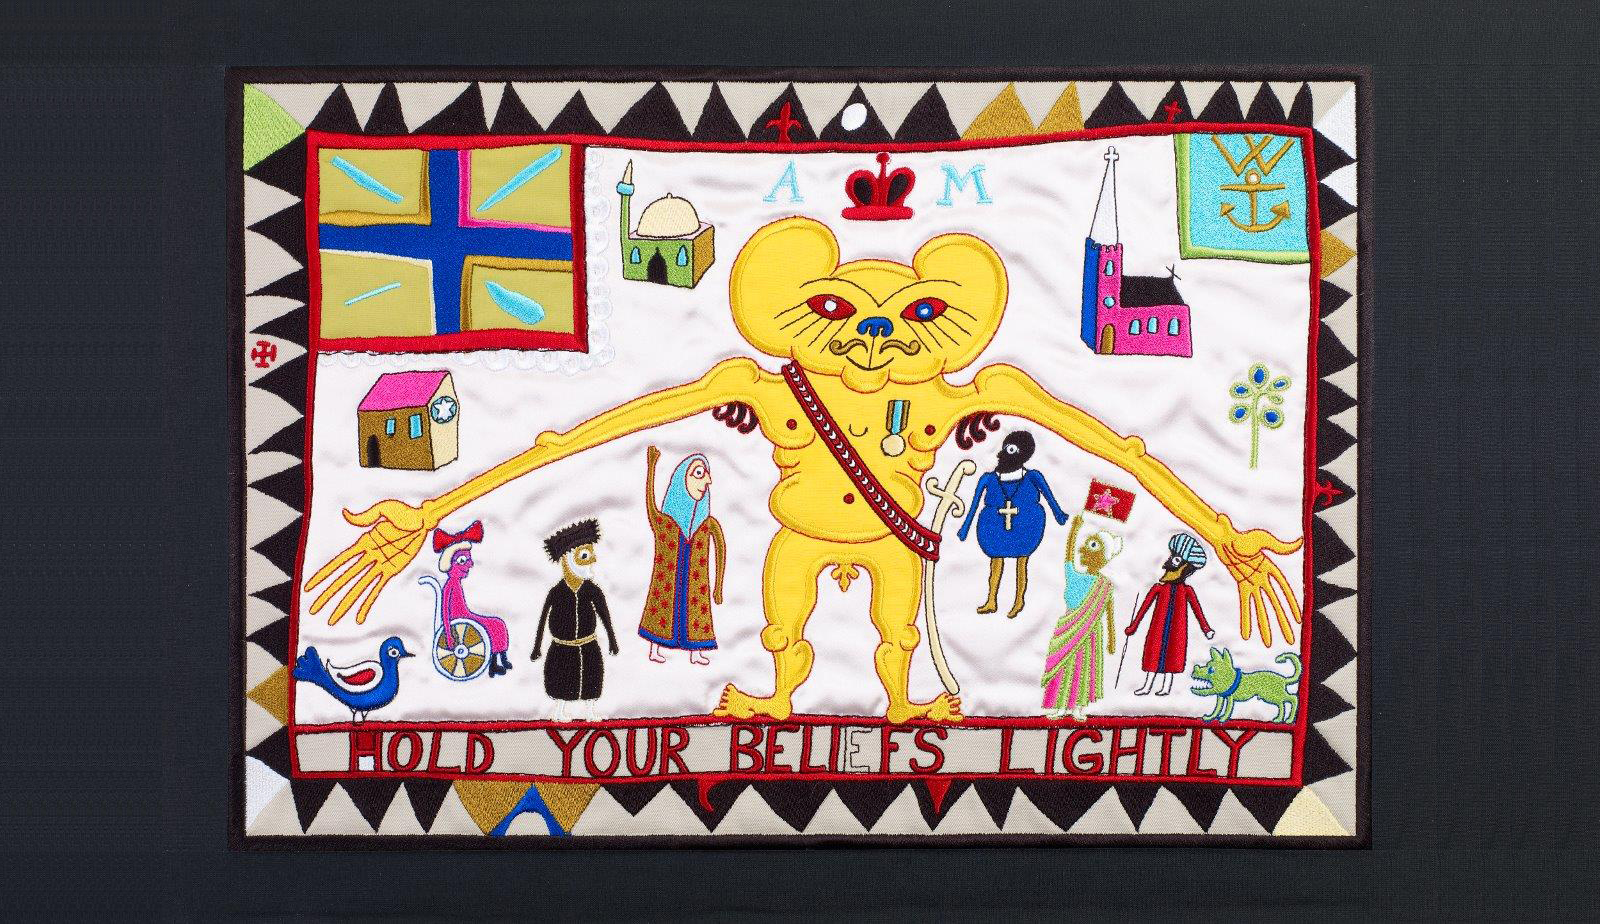 grayson_perry_hold_your_beliefs_lightly_breder